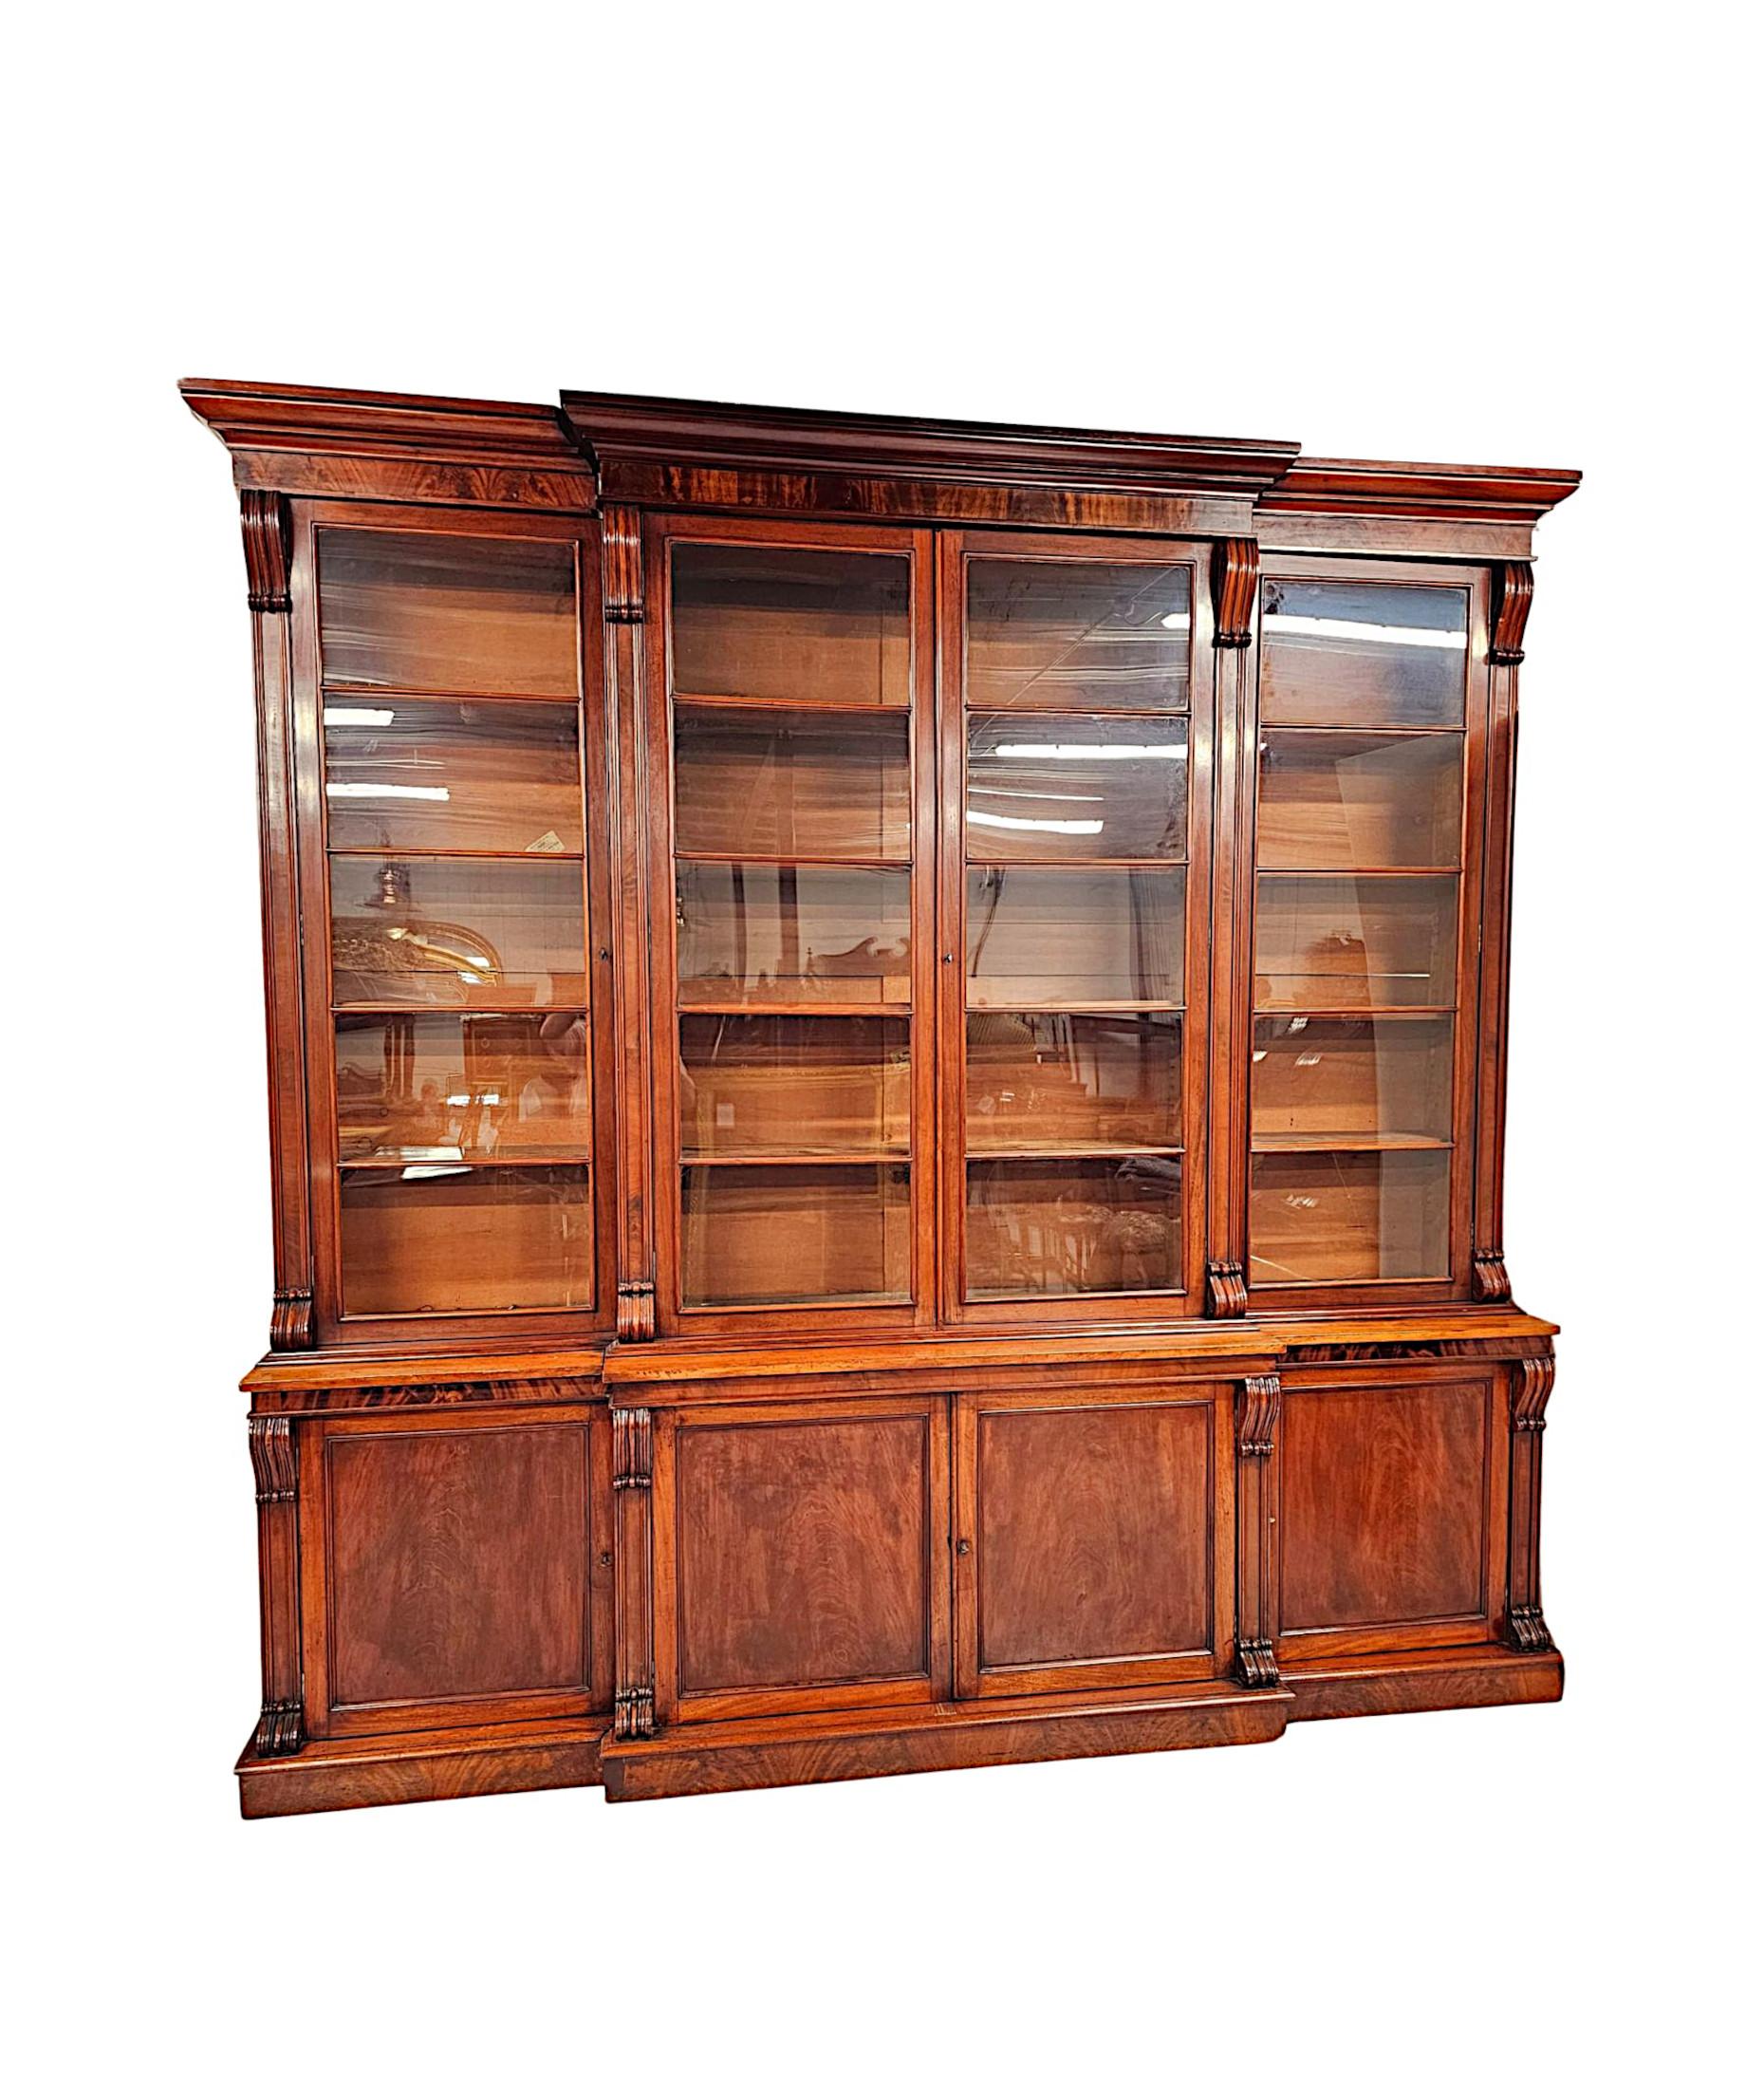 A Very Rare 19th Century Irish Breakfront Bookcase Labelled 'Strahan of Dublin' For Sale 1